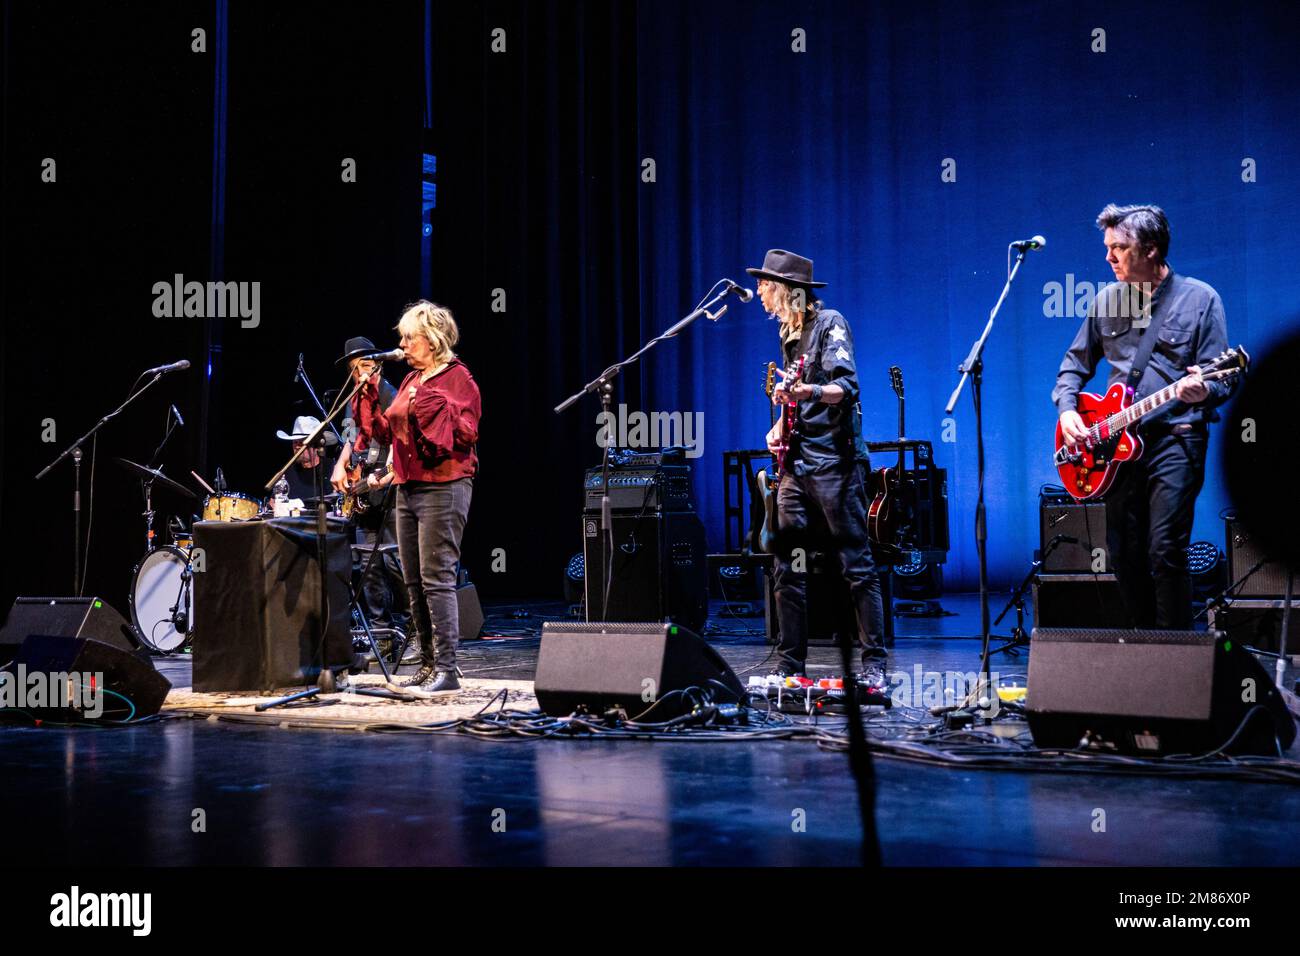 Milan Italy. 10 January 2023. The American singer-songwriter LUCINDA WILLIAMS performs live on stage at Teatro Lirico Giorgio Gaber to present her new album 'Good Souls Better Angels'. Stock Photo